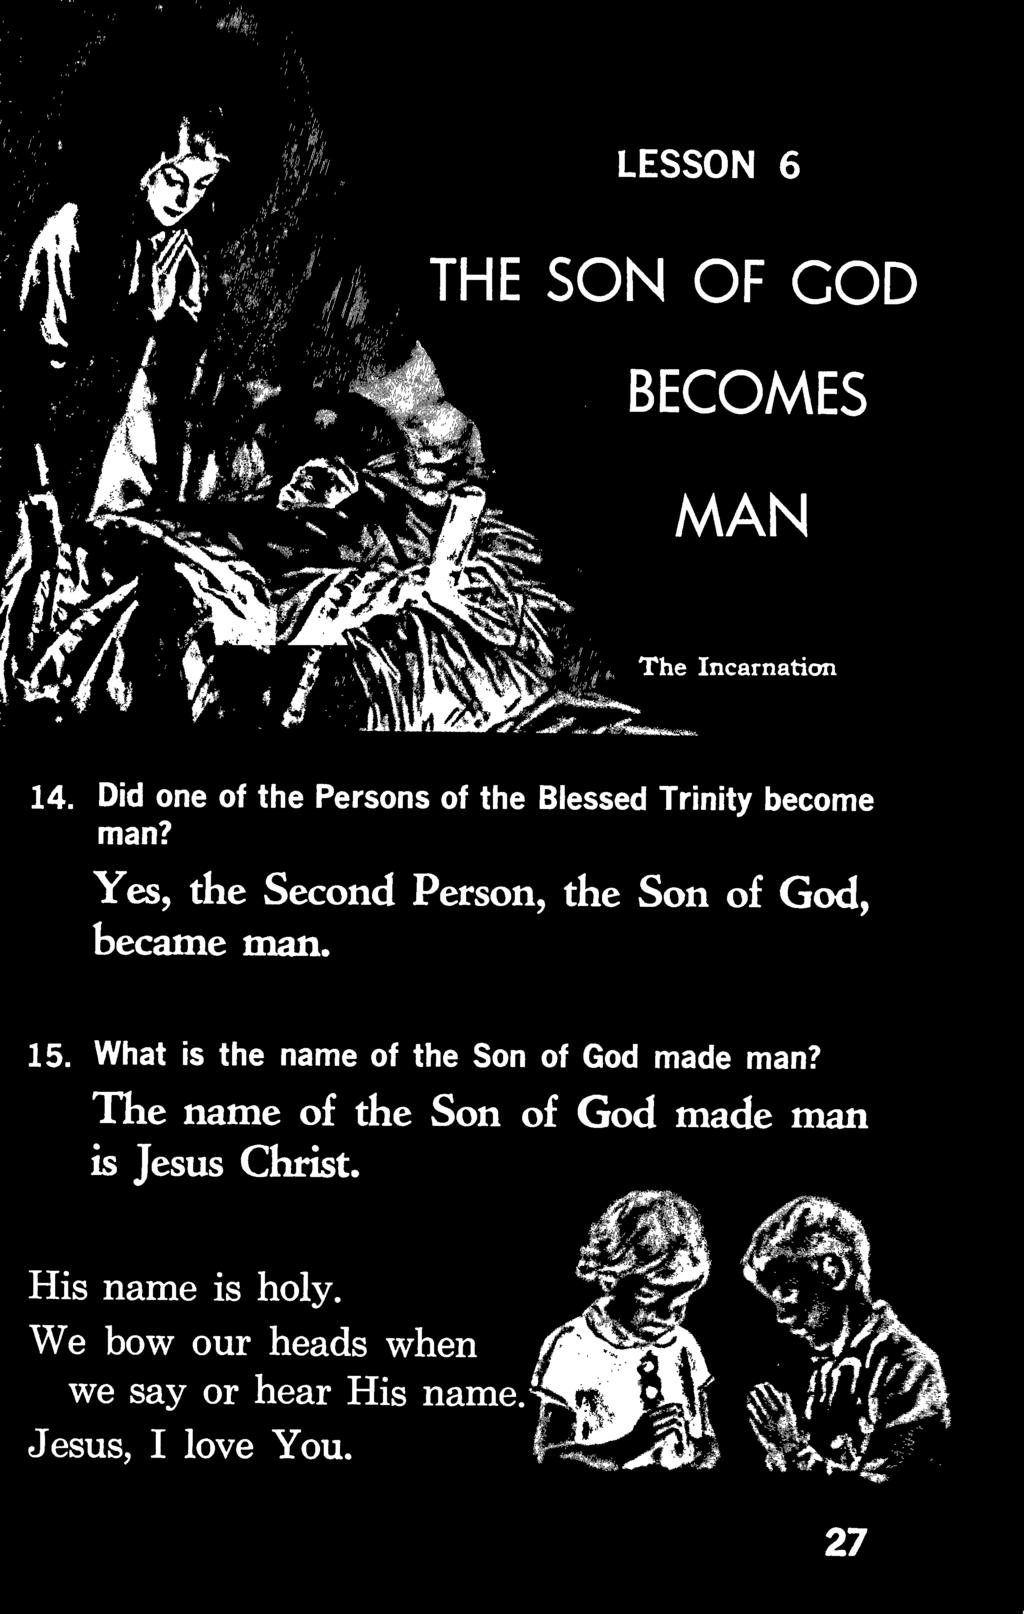 The name of the Son of God made man is Jesus Christ.